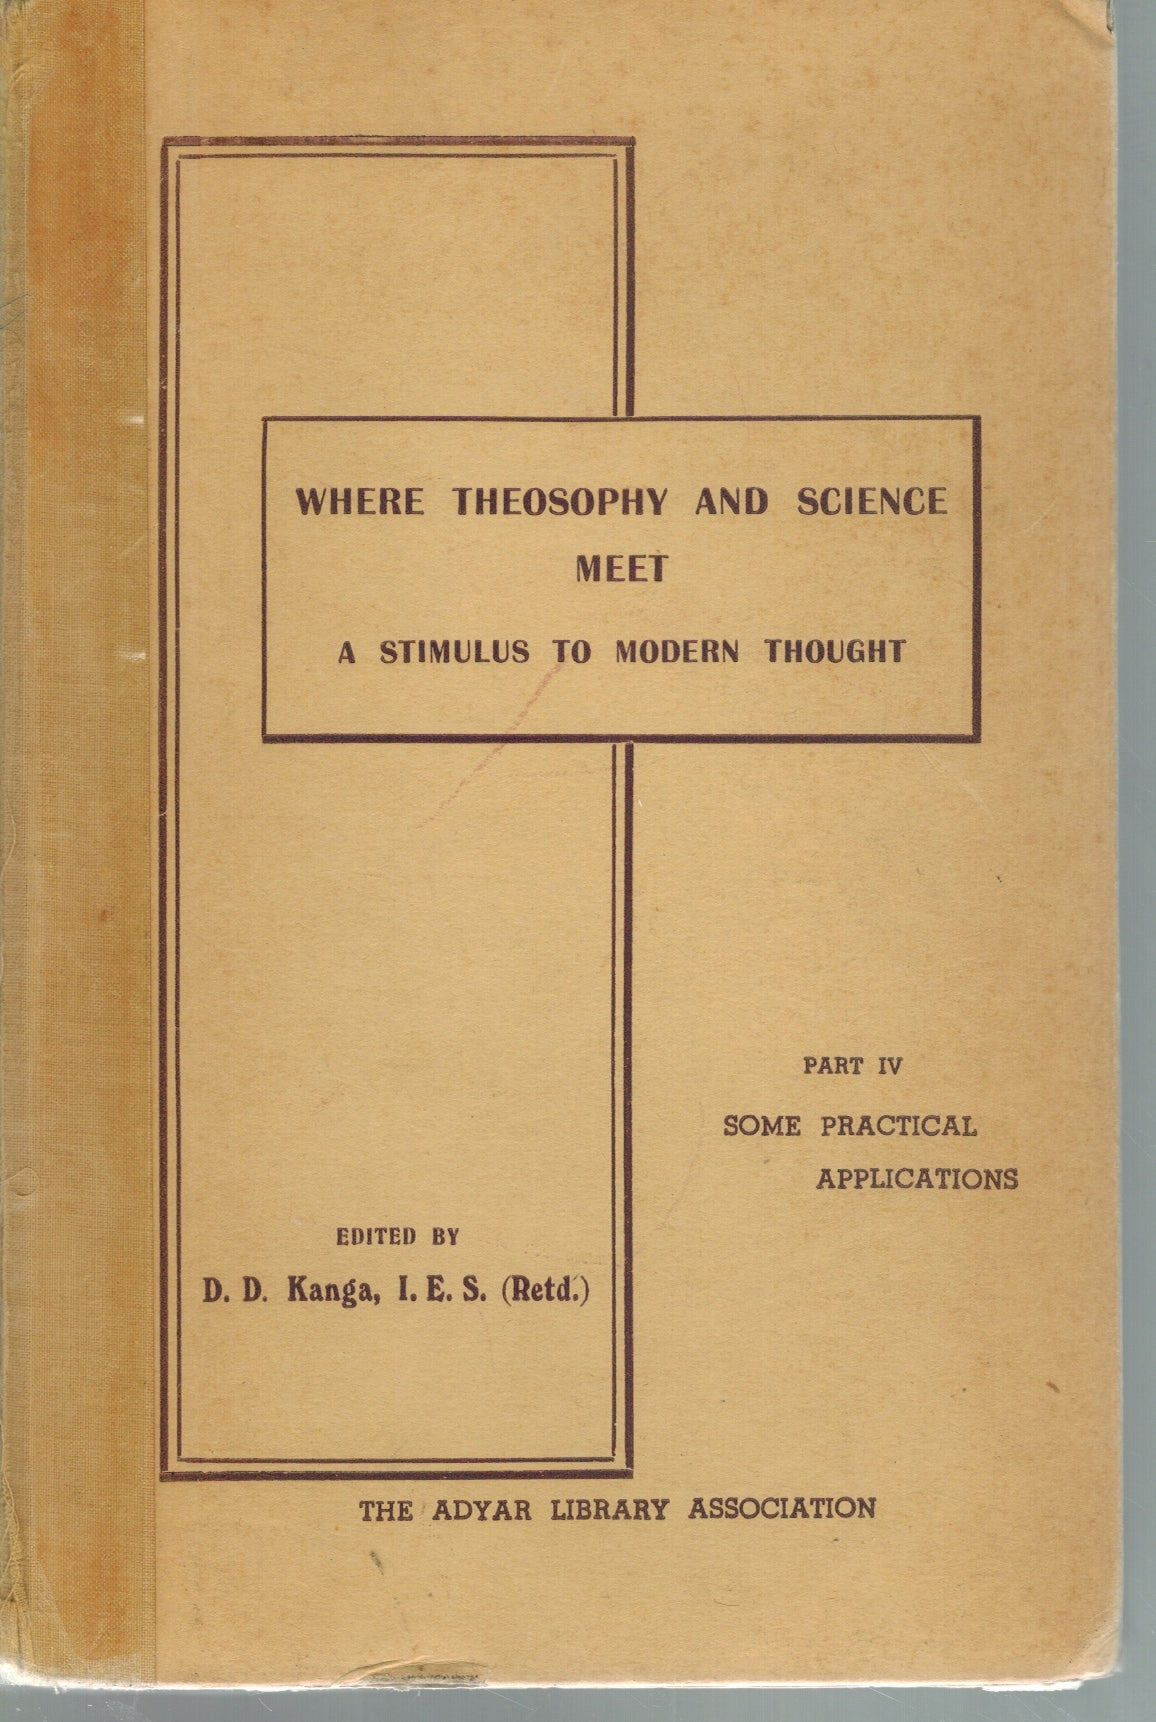 WHERE THEOSOPHY AND SCIENCE MEET A STIMULUS TO MODERN THOUGHT PART IV